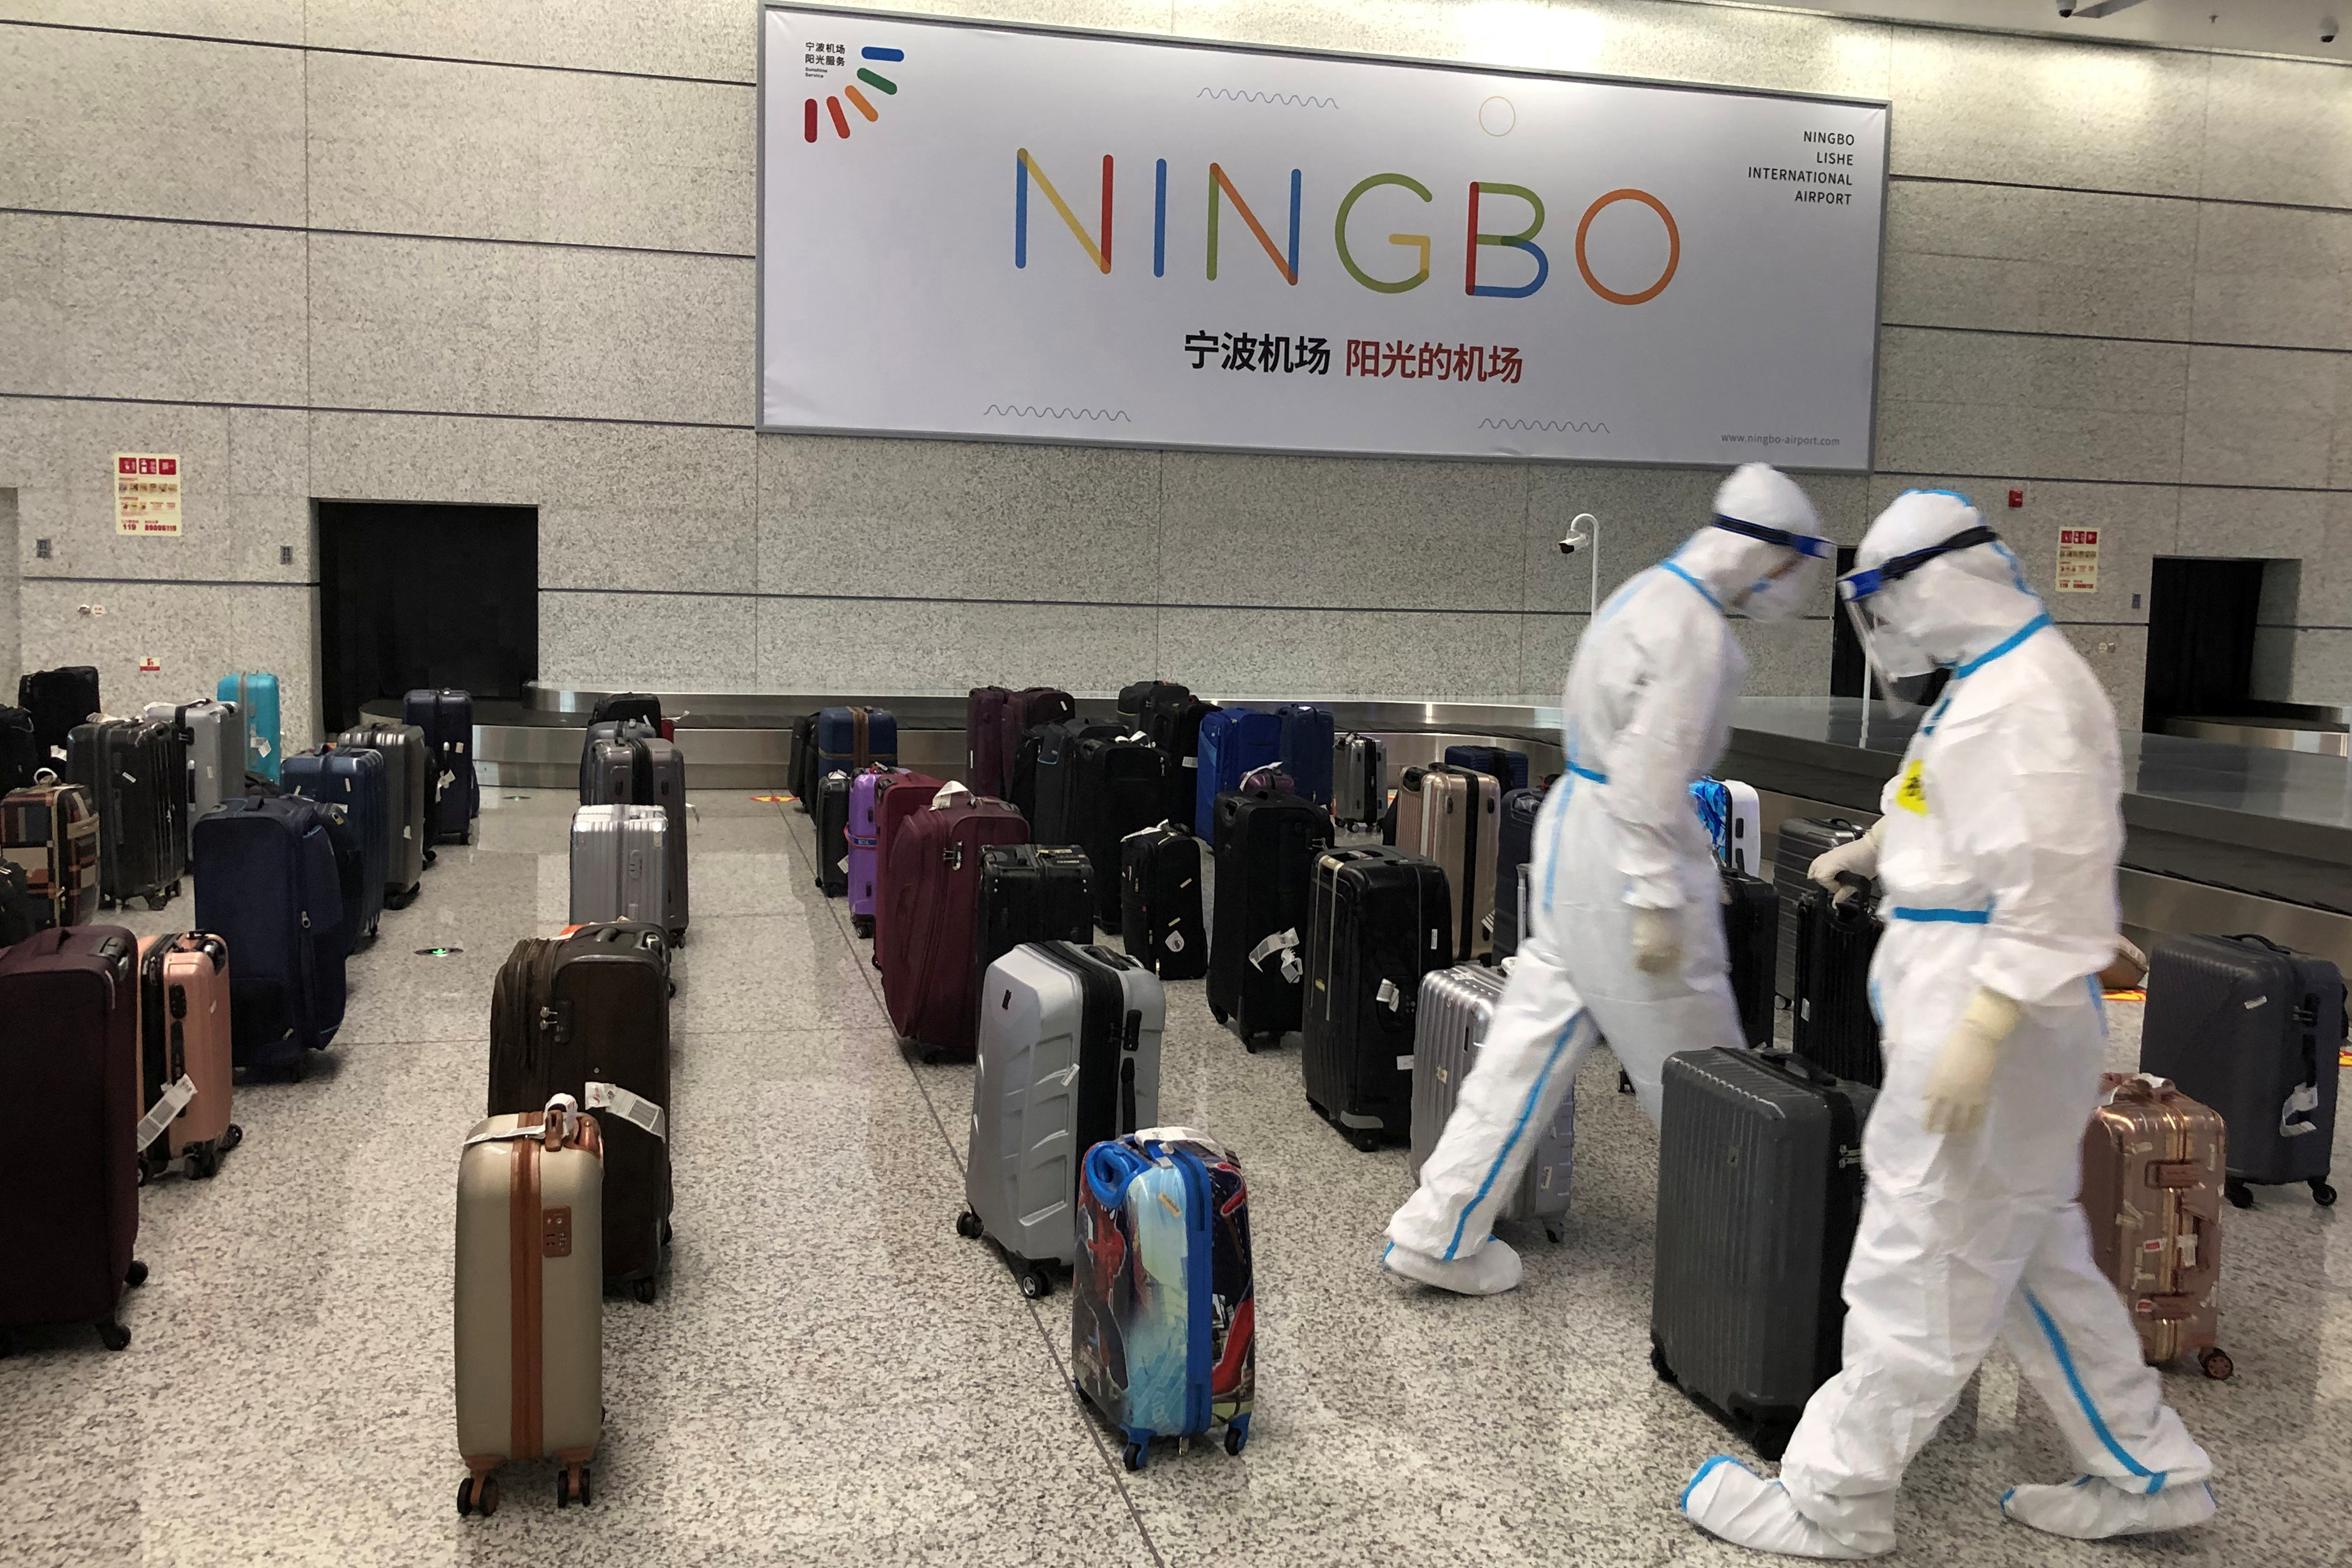 Workers in protective suits sort luggage arriving from New Delhi at Ningbo Lishe International Airport